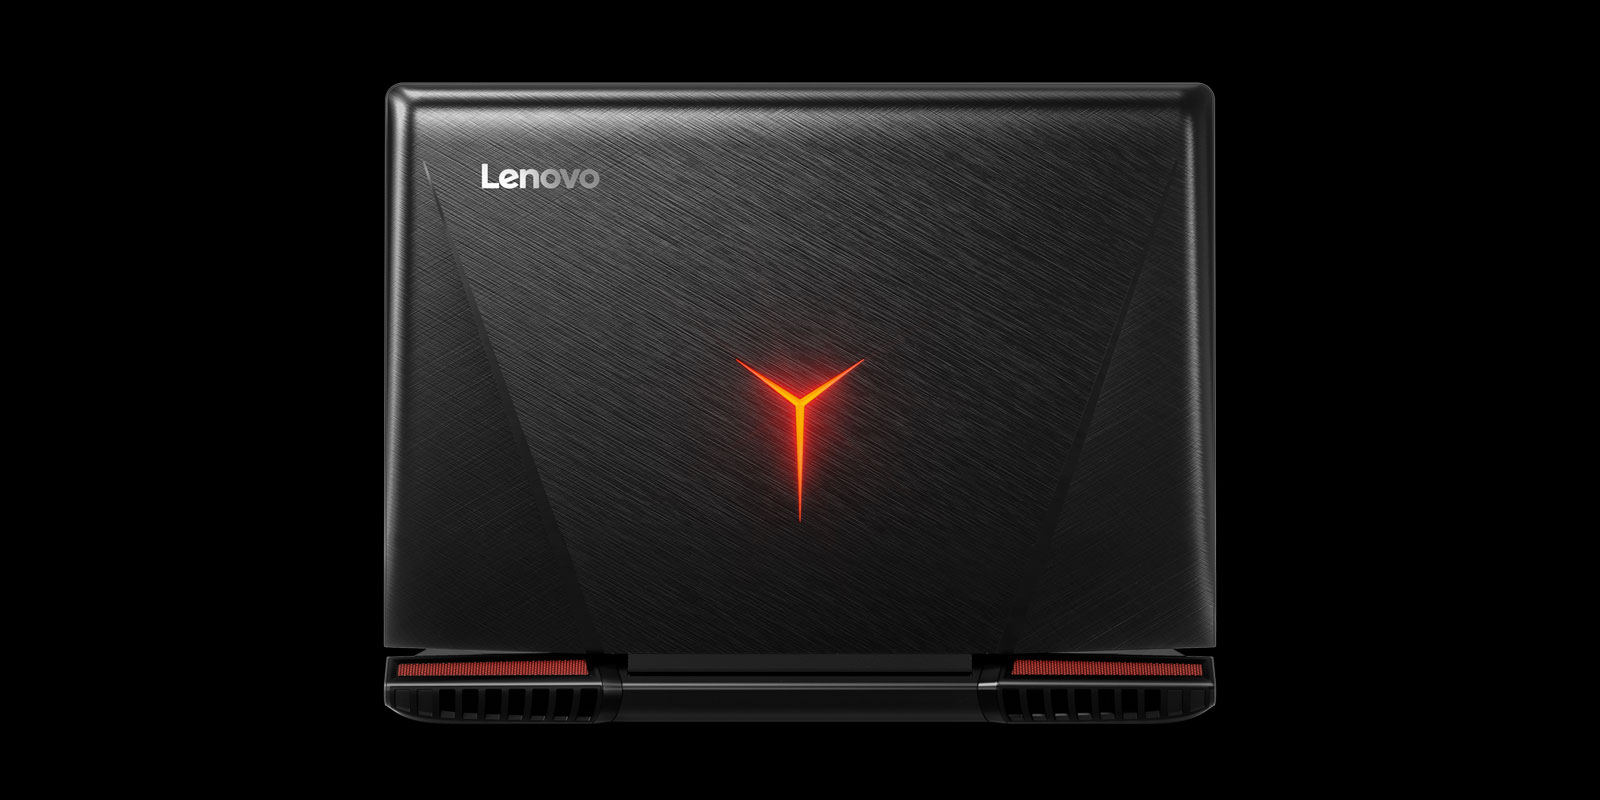 Nice Images Collection: Lenovo Desktop Wallpapers